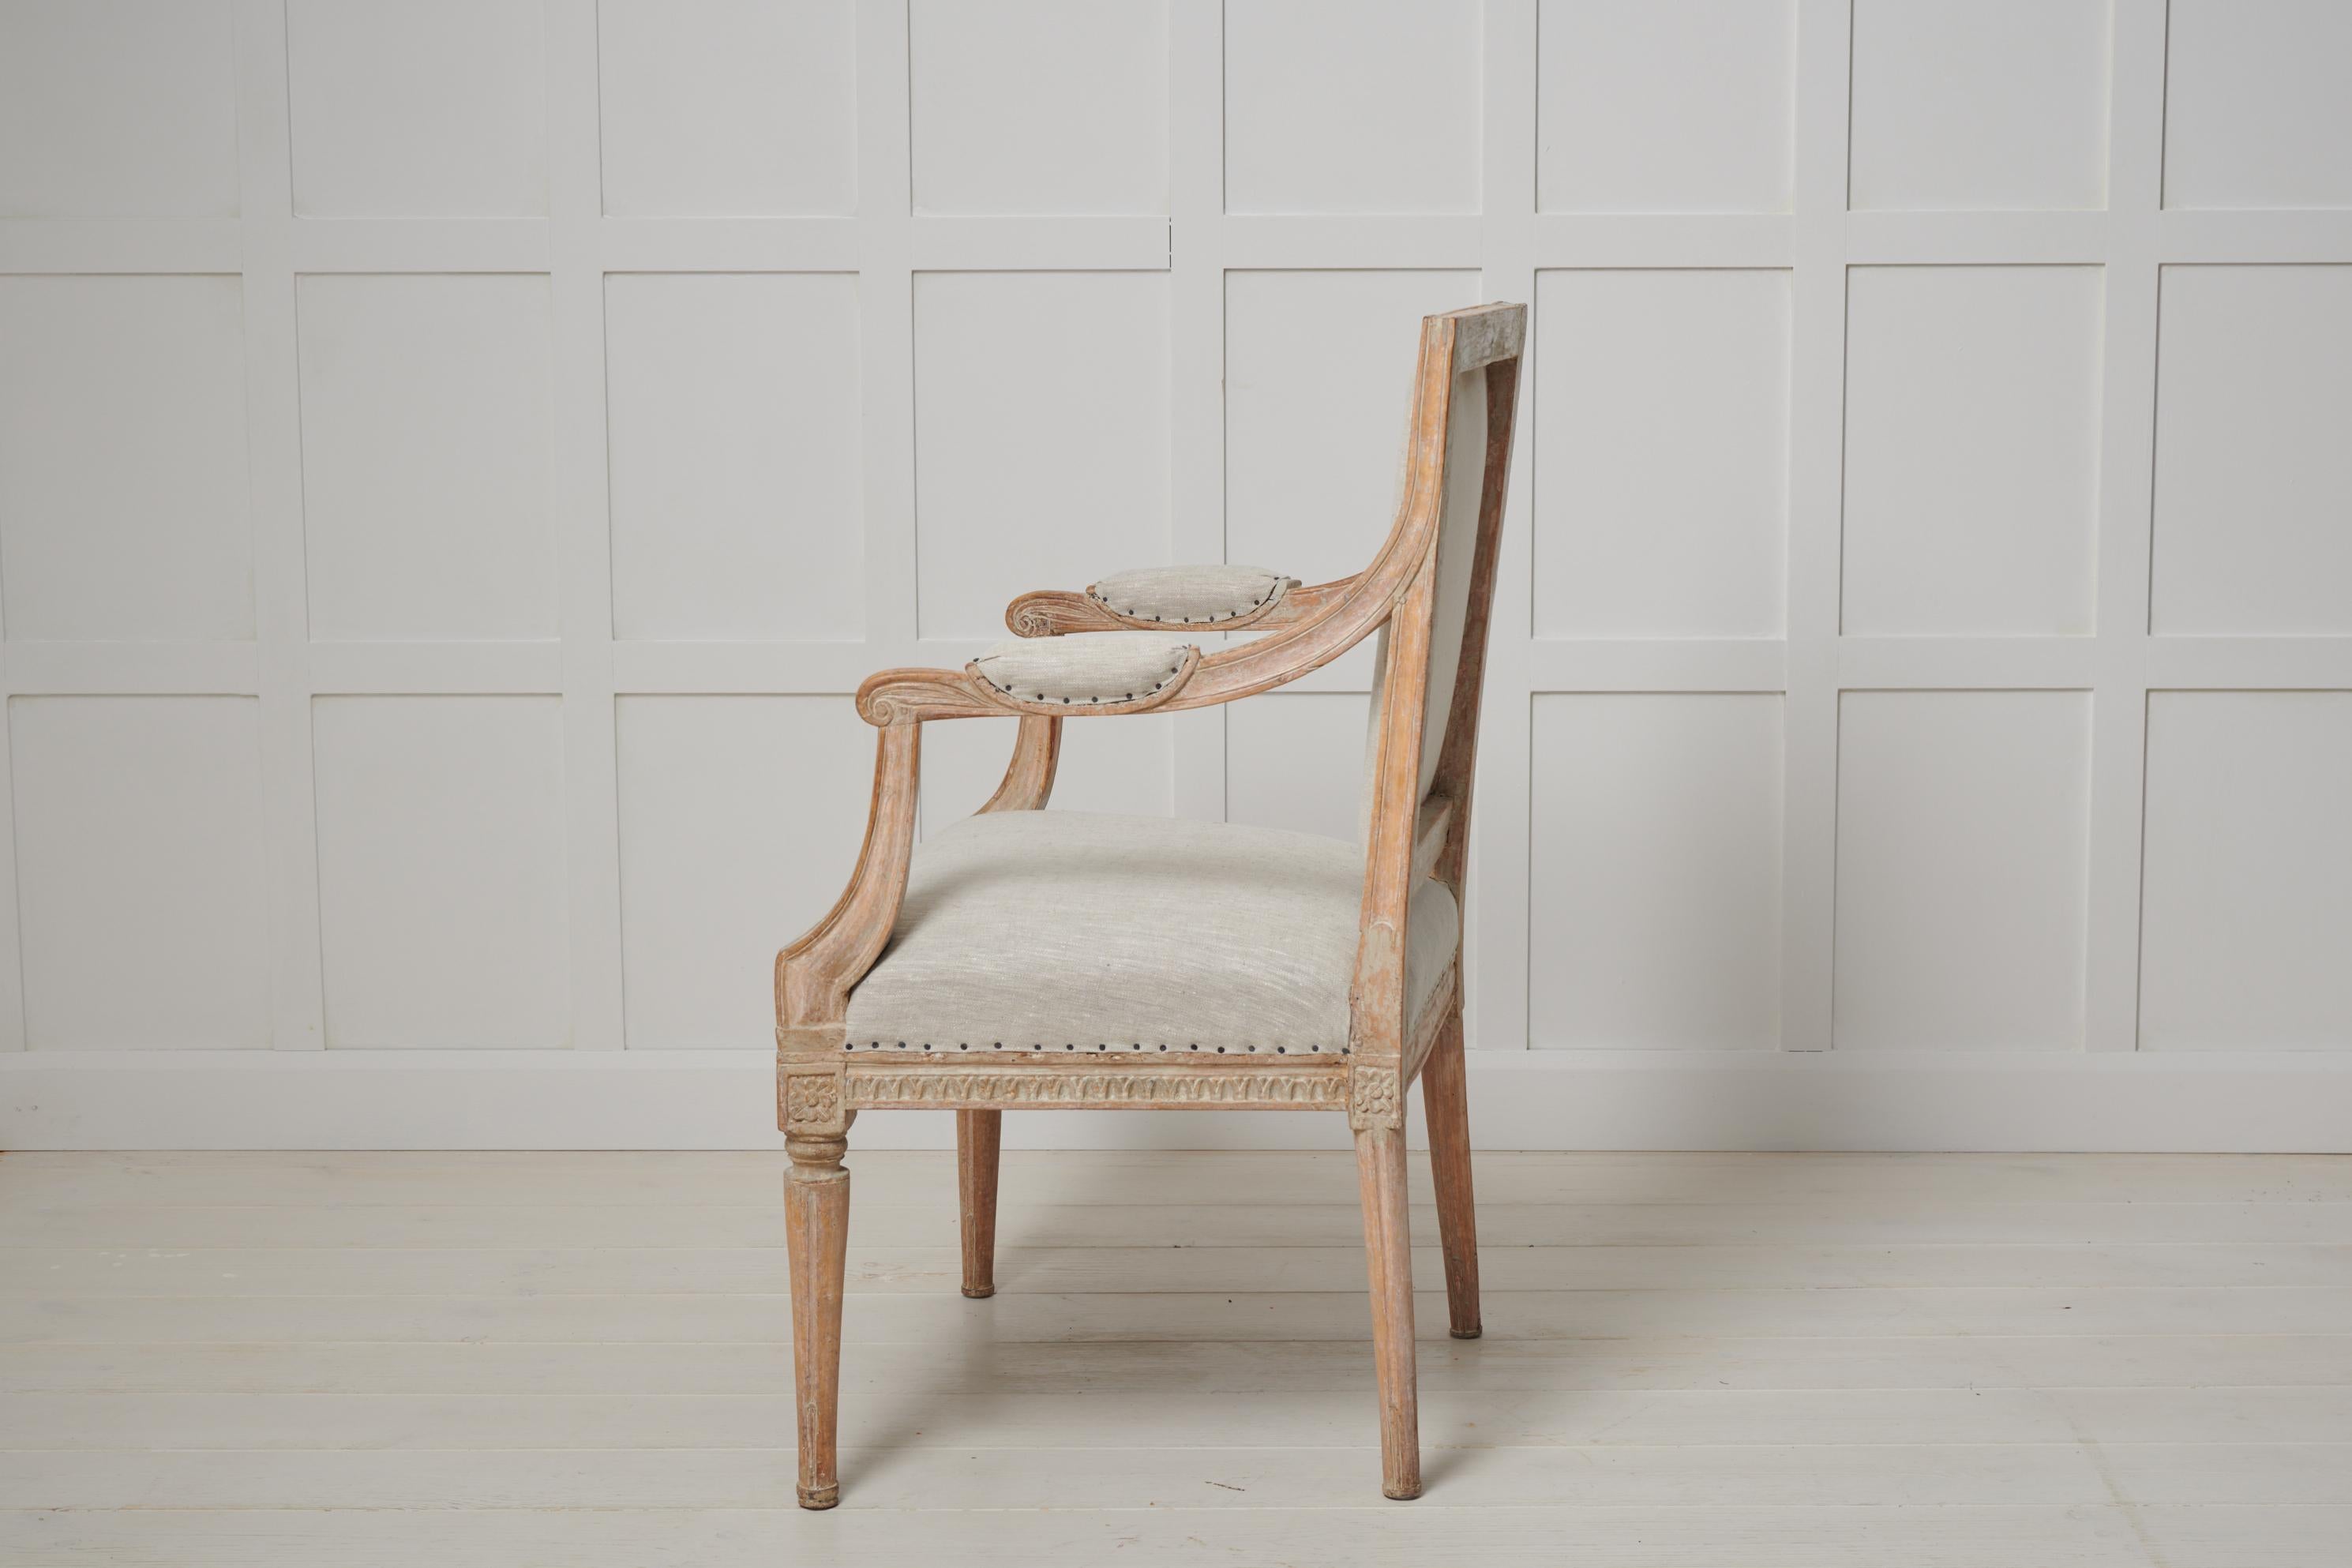 Antique Genuine Swedish Gustavian Upholstered Armchair In Good Condition For Sale In Kramfors, SE